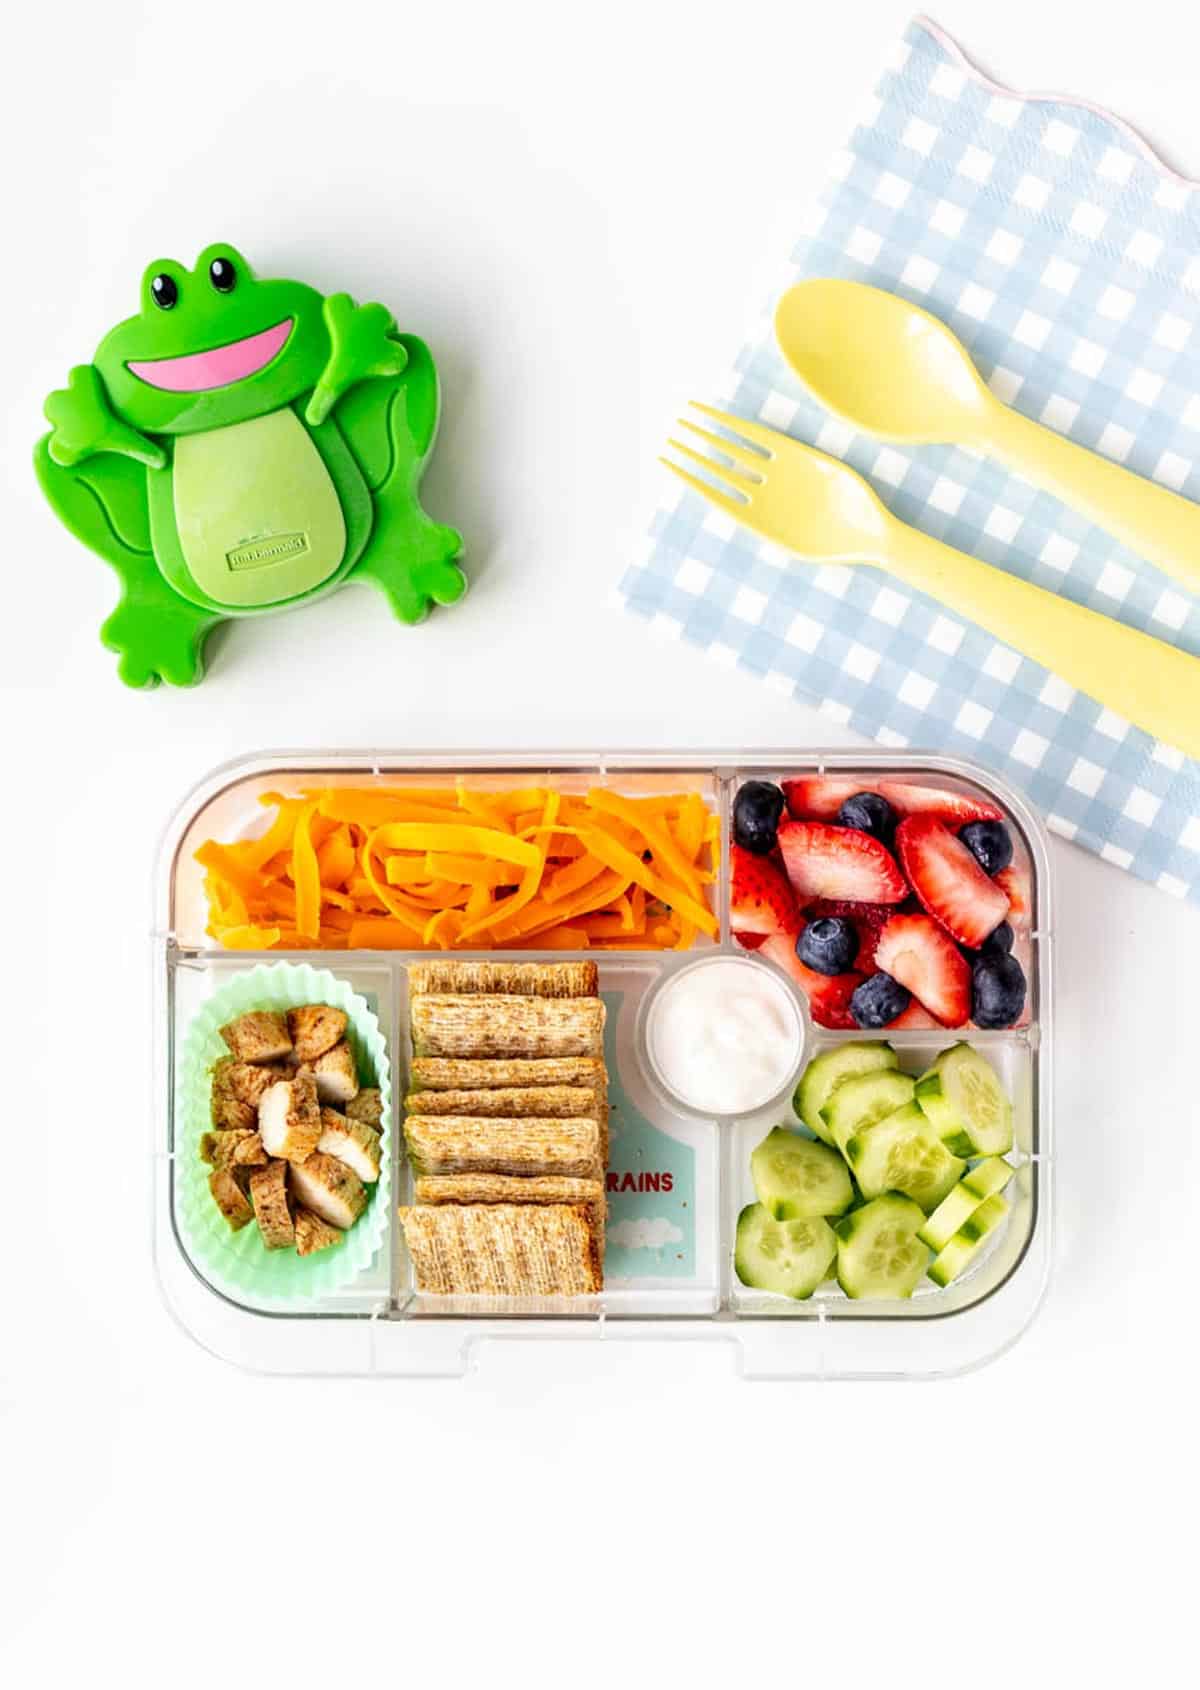 A bento lunch box with a frog shaped ice pack next to it.